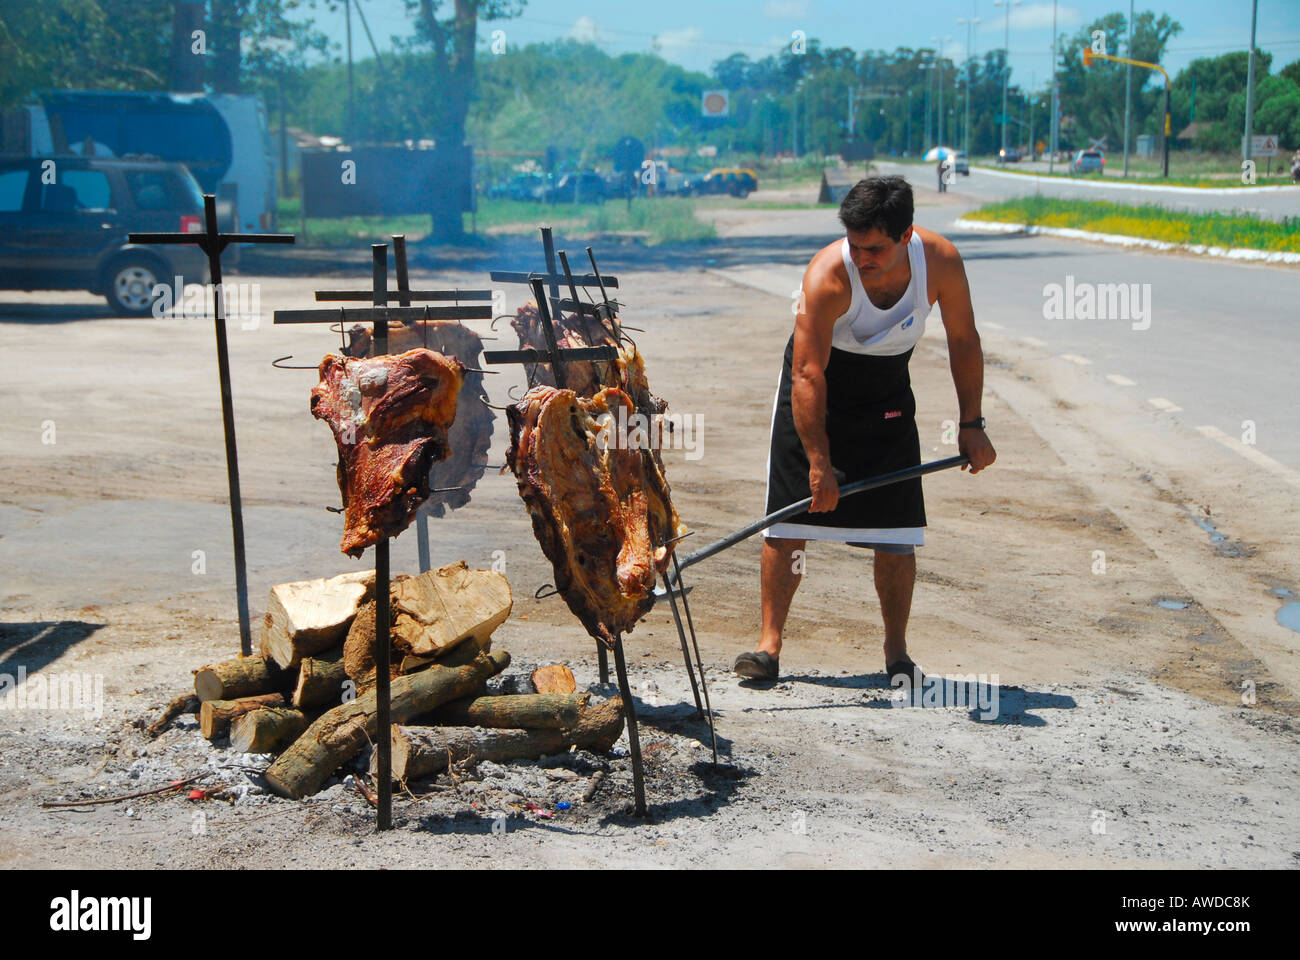 Grill Work High Resolution Stock Photography and Images - Alamy